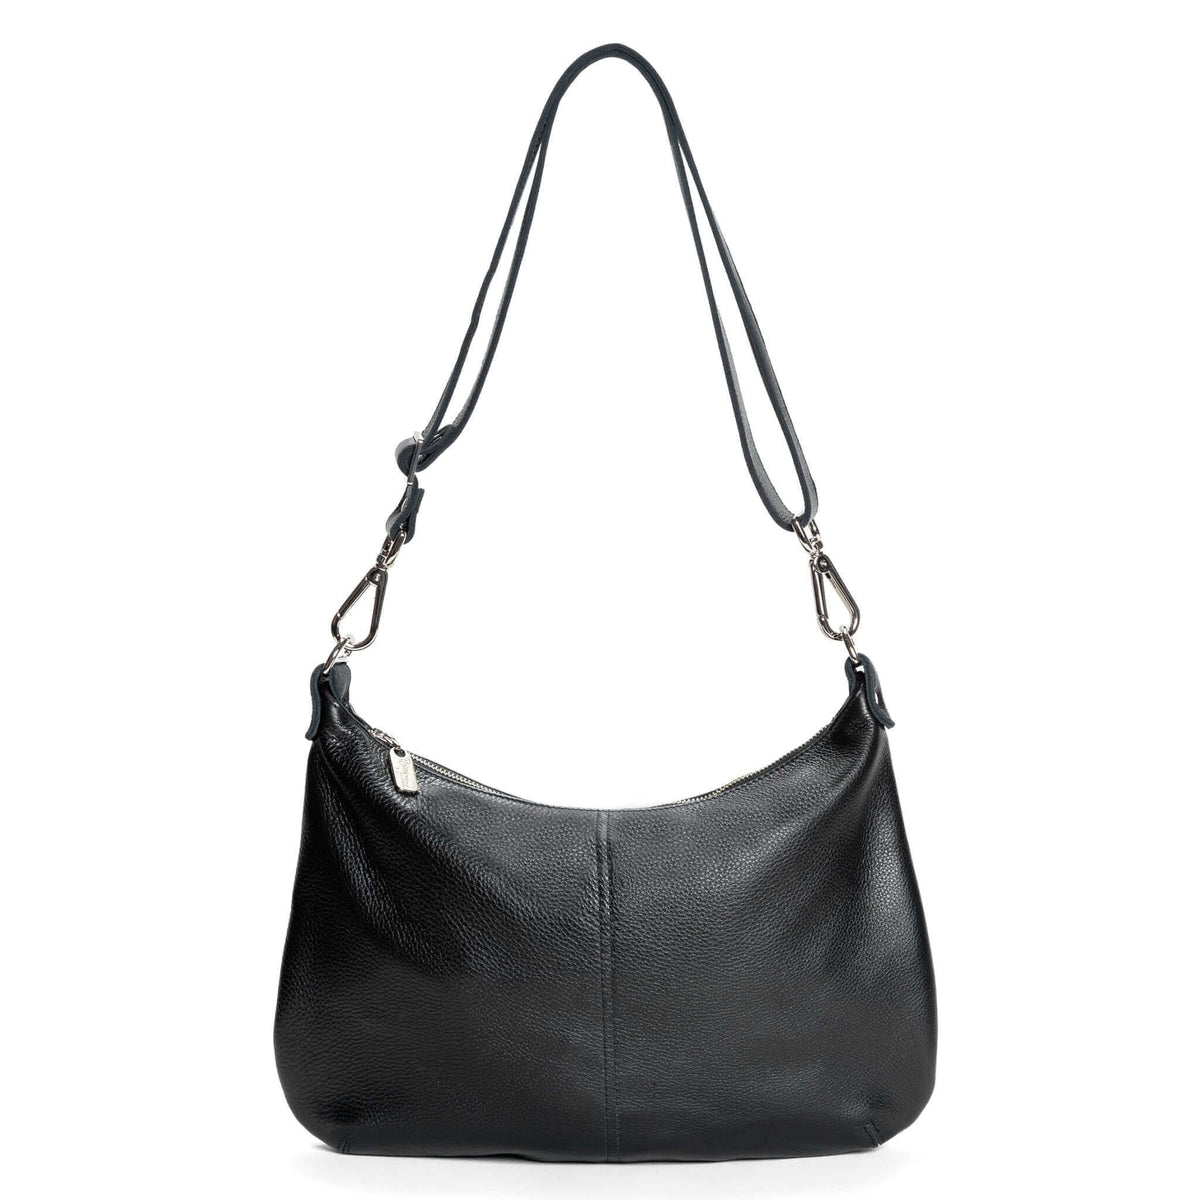 Hobo Crossbody, Black, Finished Leather, Semi-Aniline Leather, Brynn Capella, made in Chicago